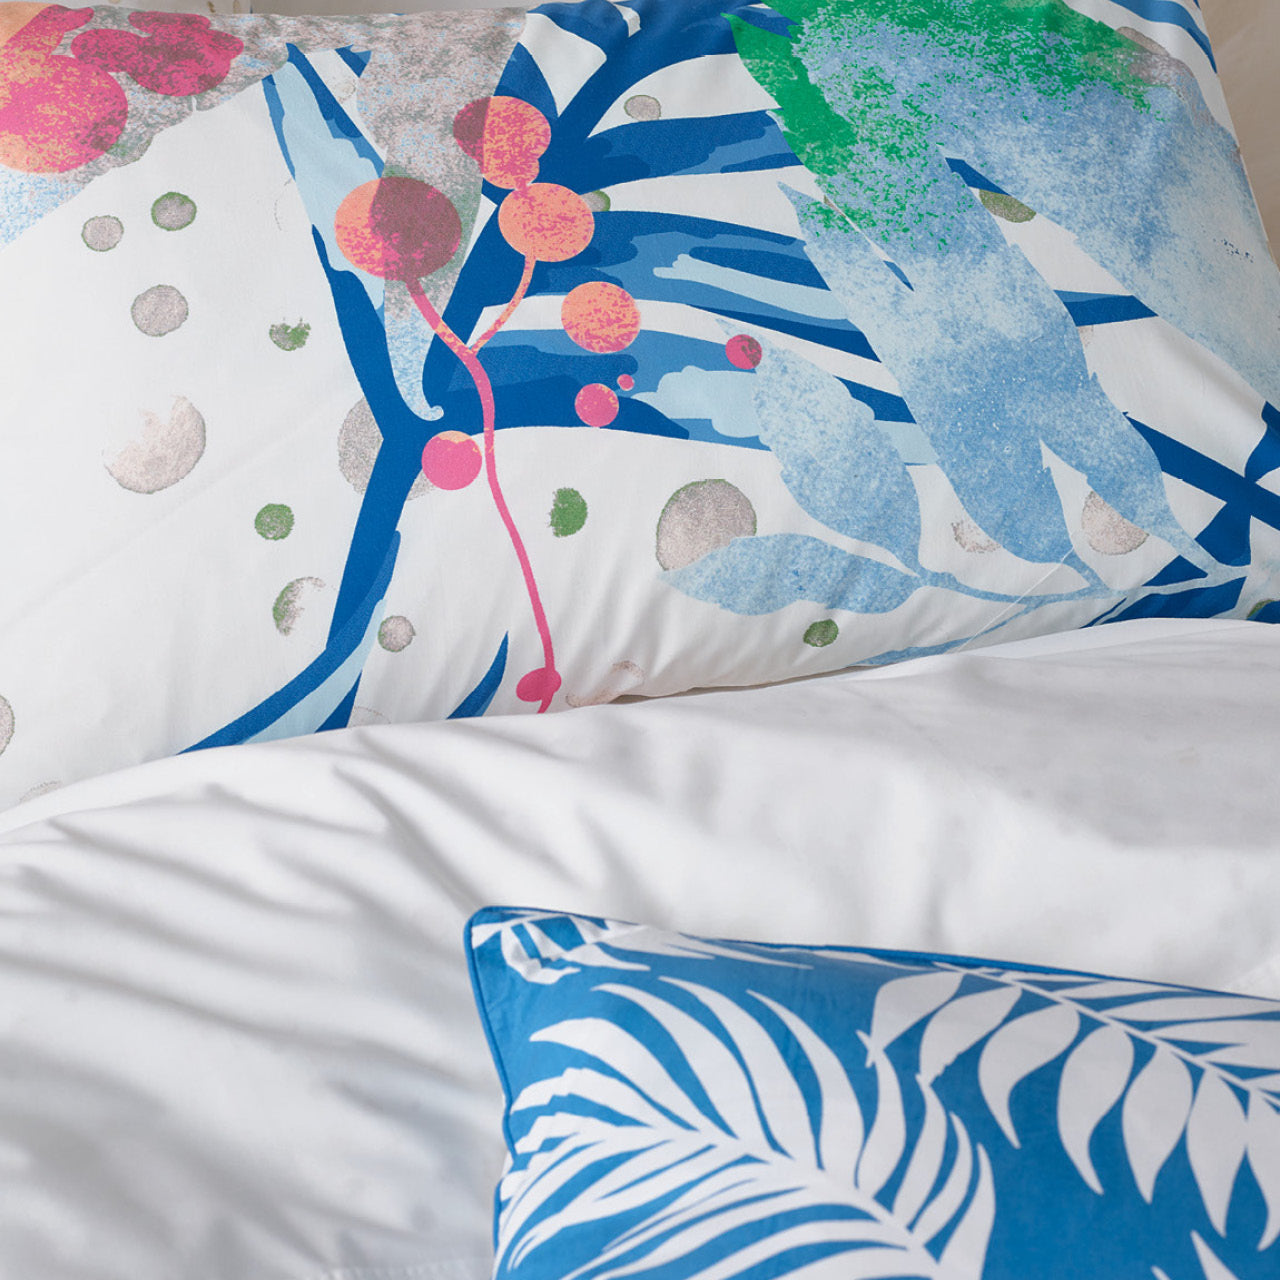 Close up shot of Avoca pillowcases on bed